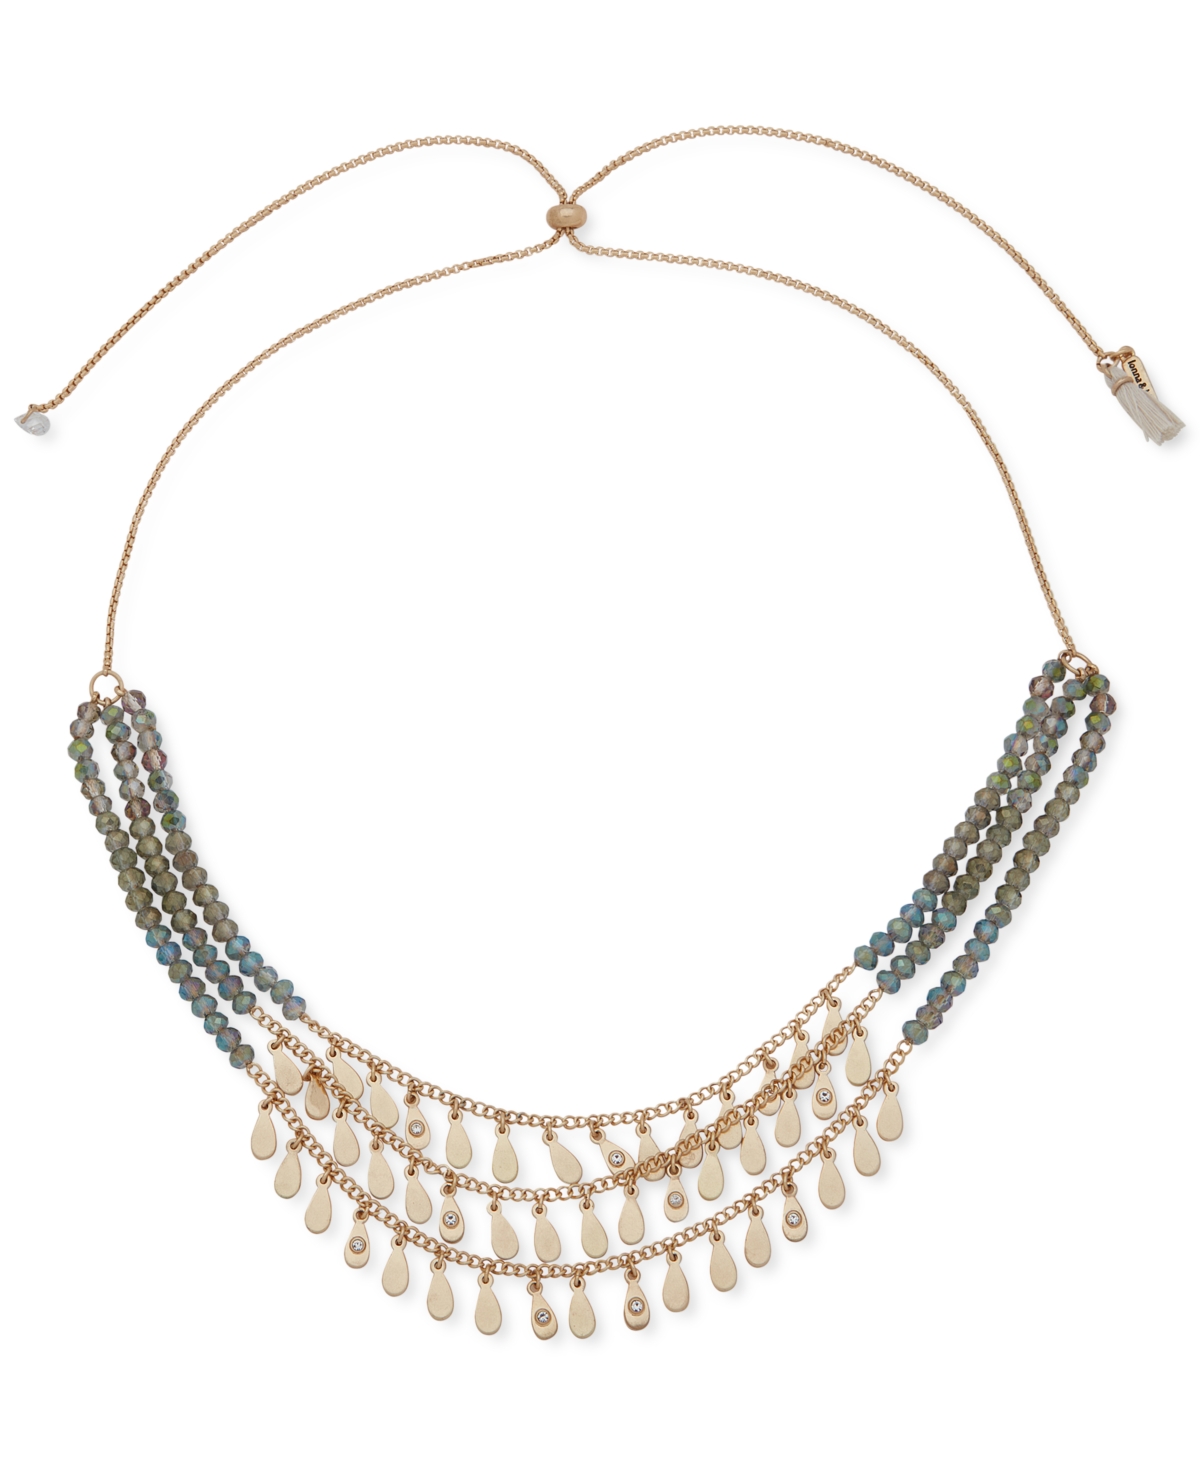 lonna & lilly Gold-Tone Three-Row Beaded Frontal Necklace, 28"